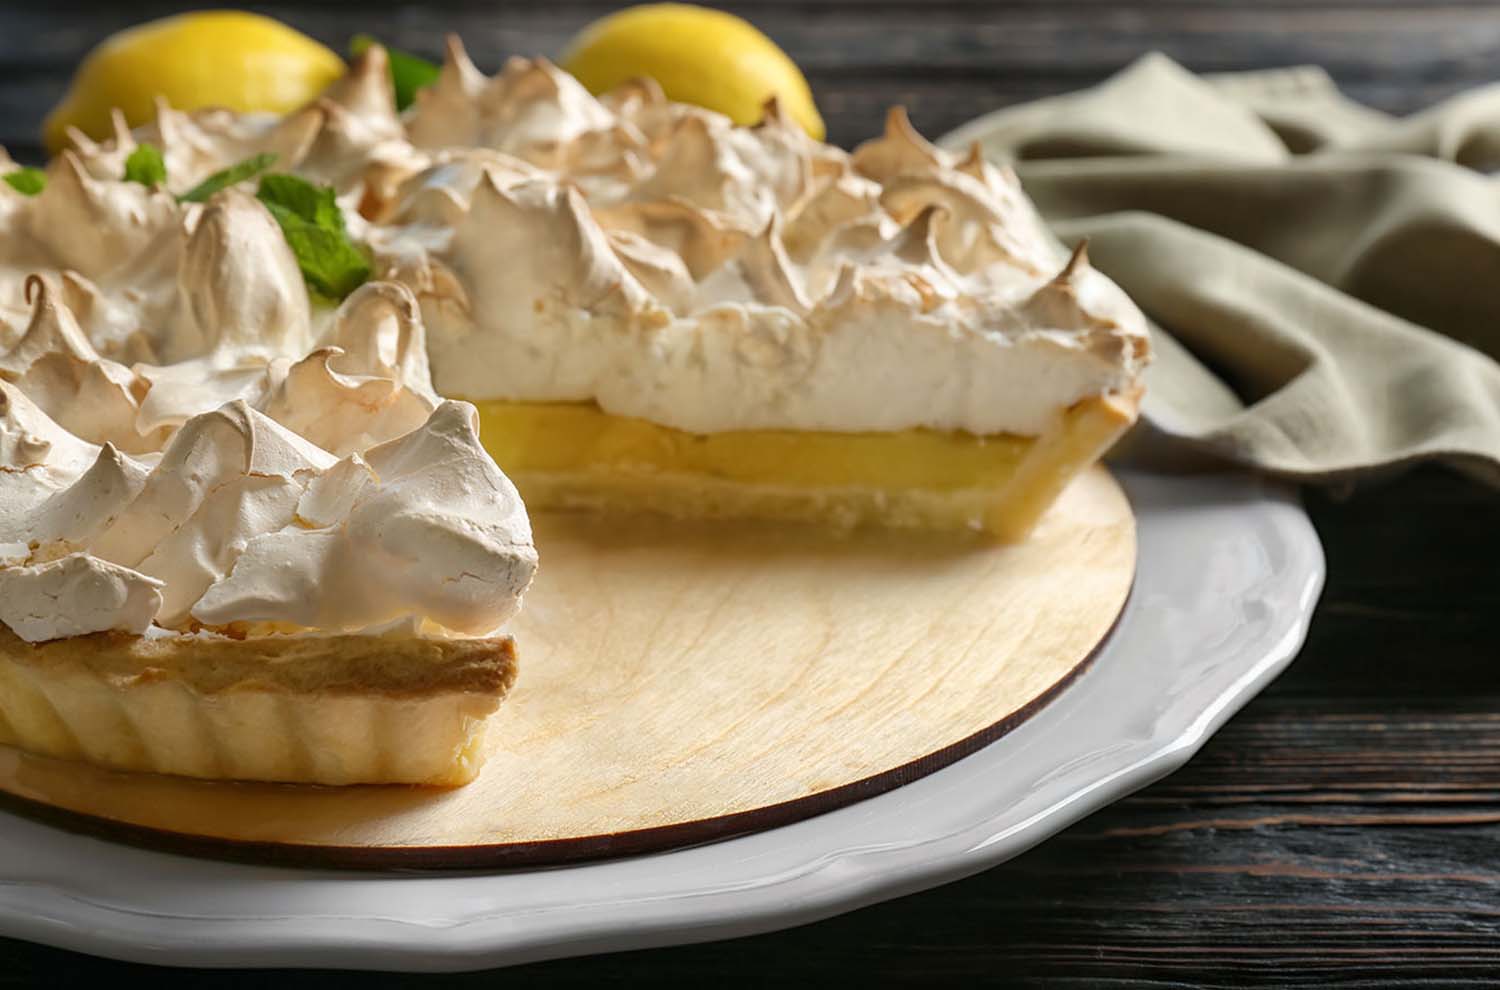 two slices of lemon lime meringue pie on serving plate